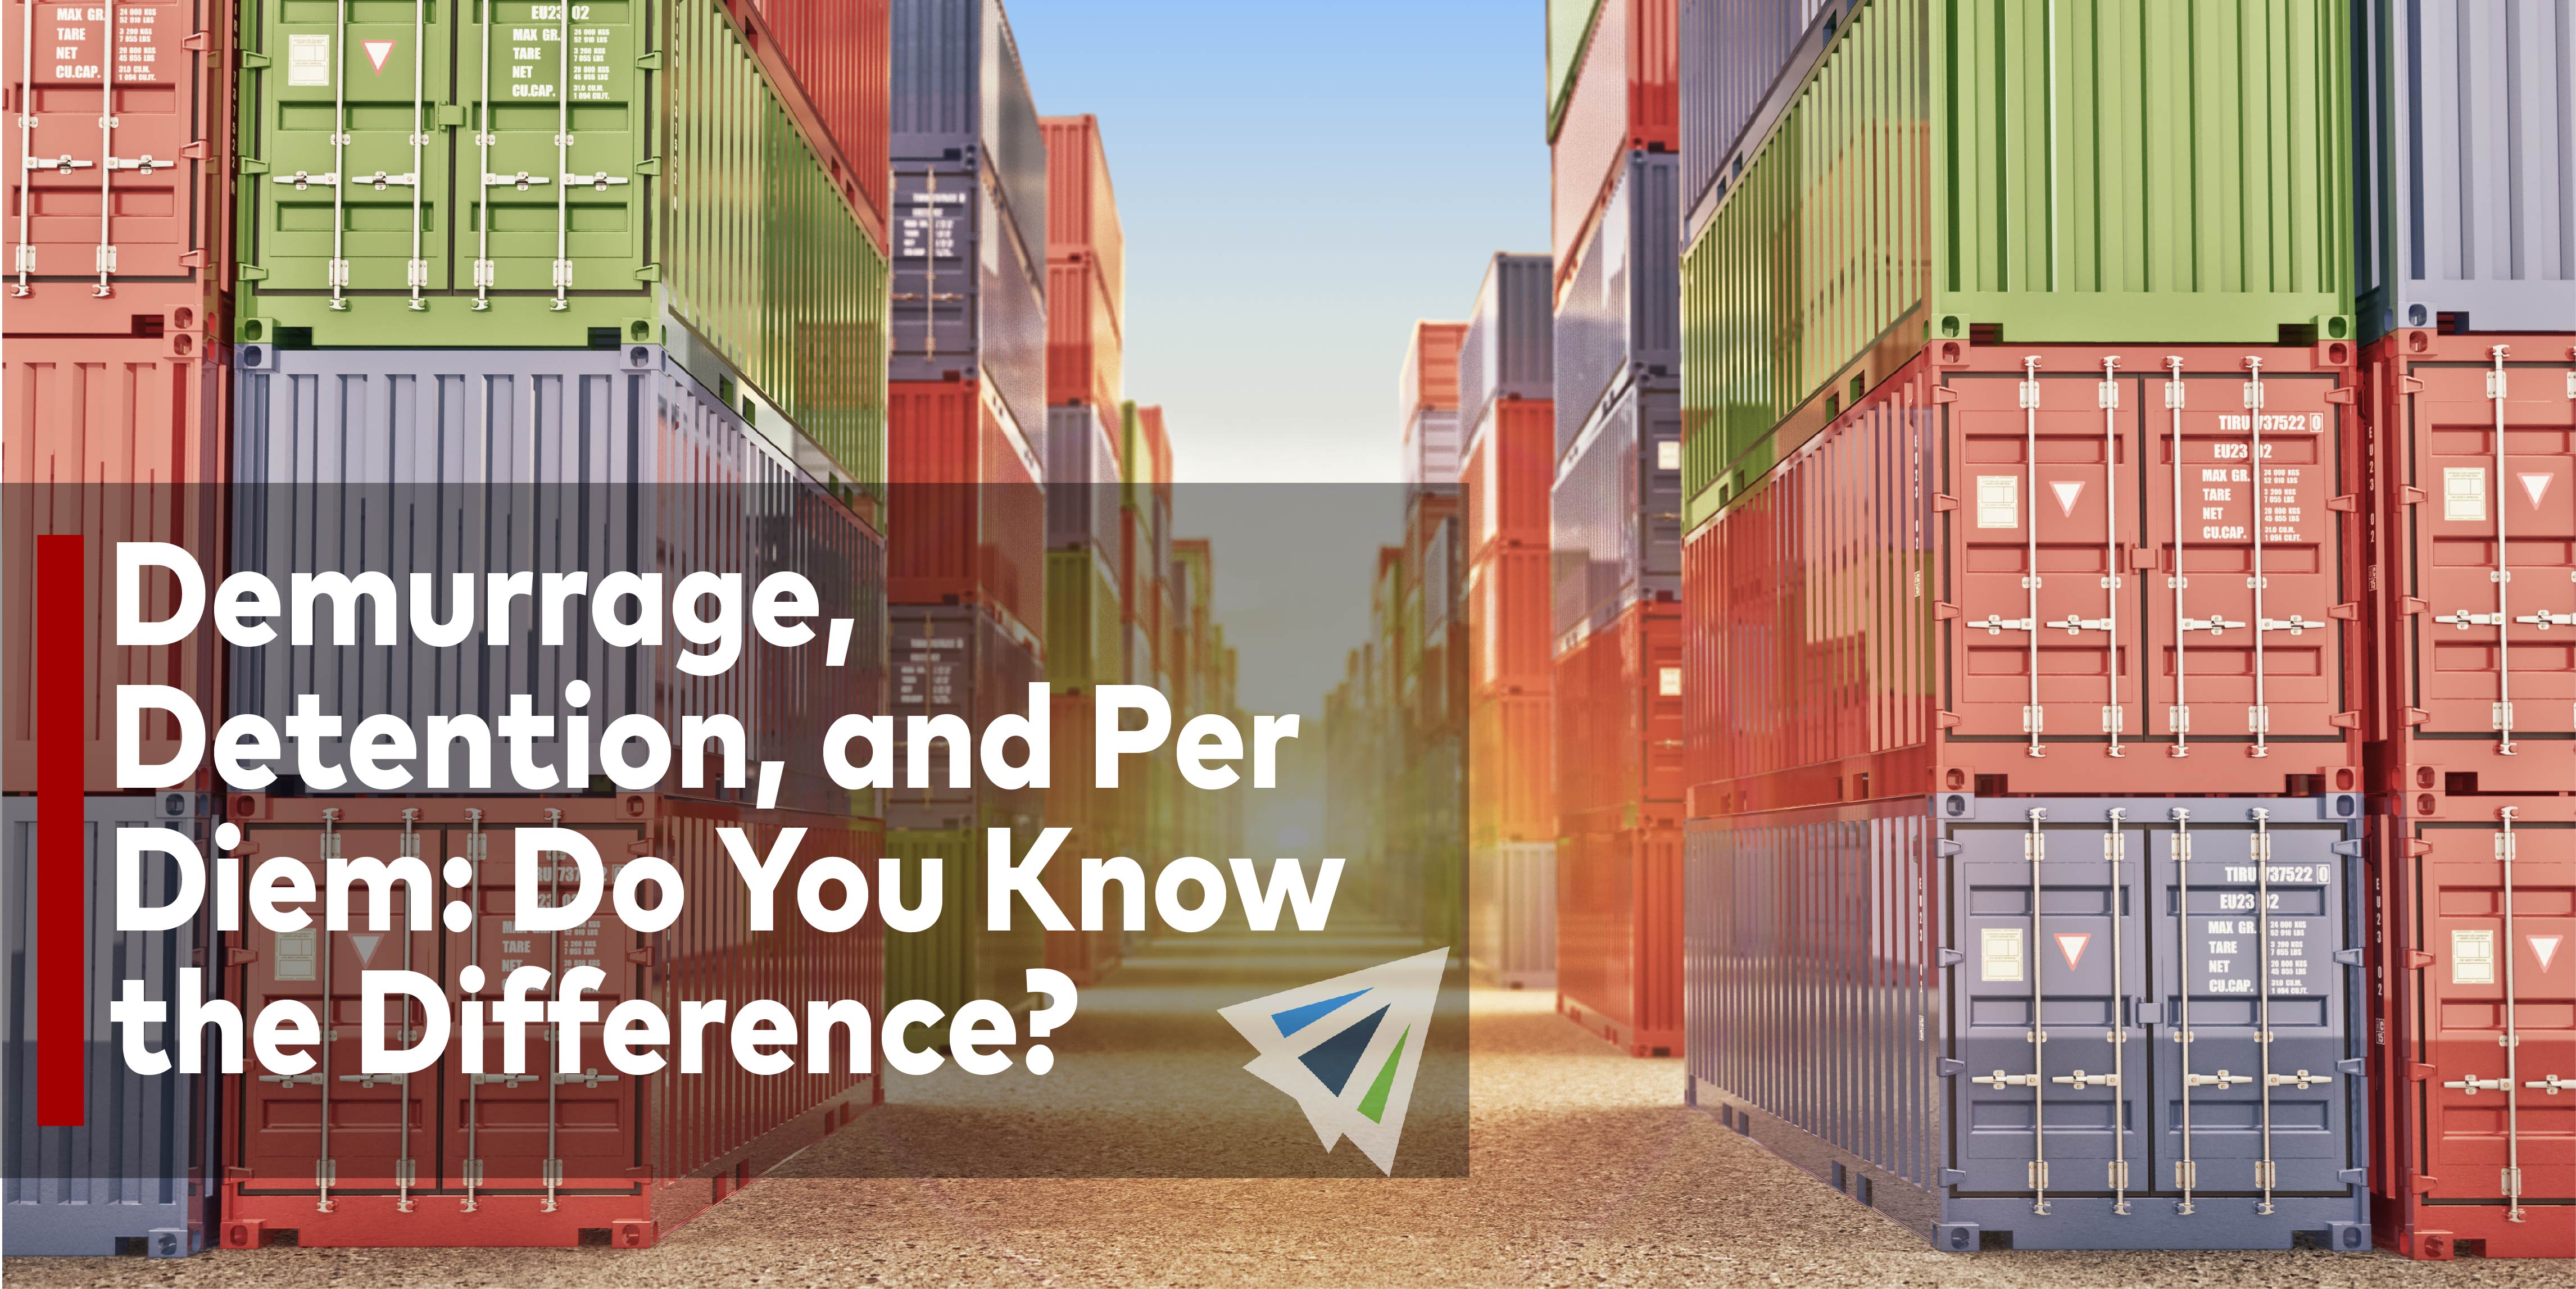 Demurrage, Detention, and Per Diem: Do You Know the Difference?